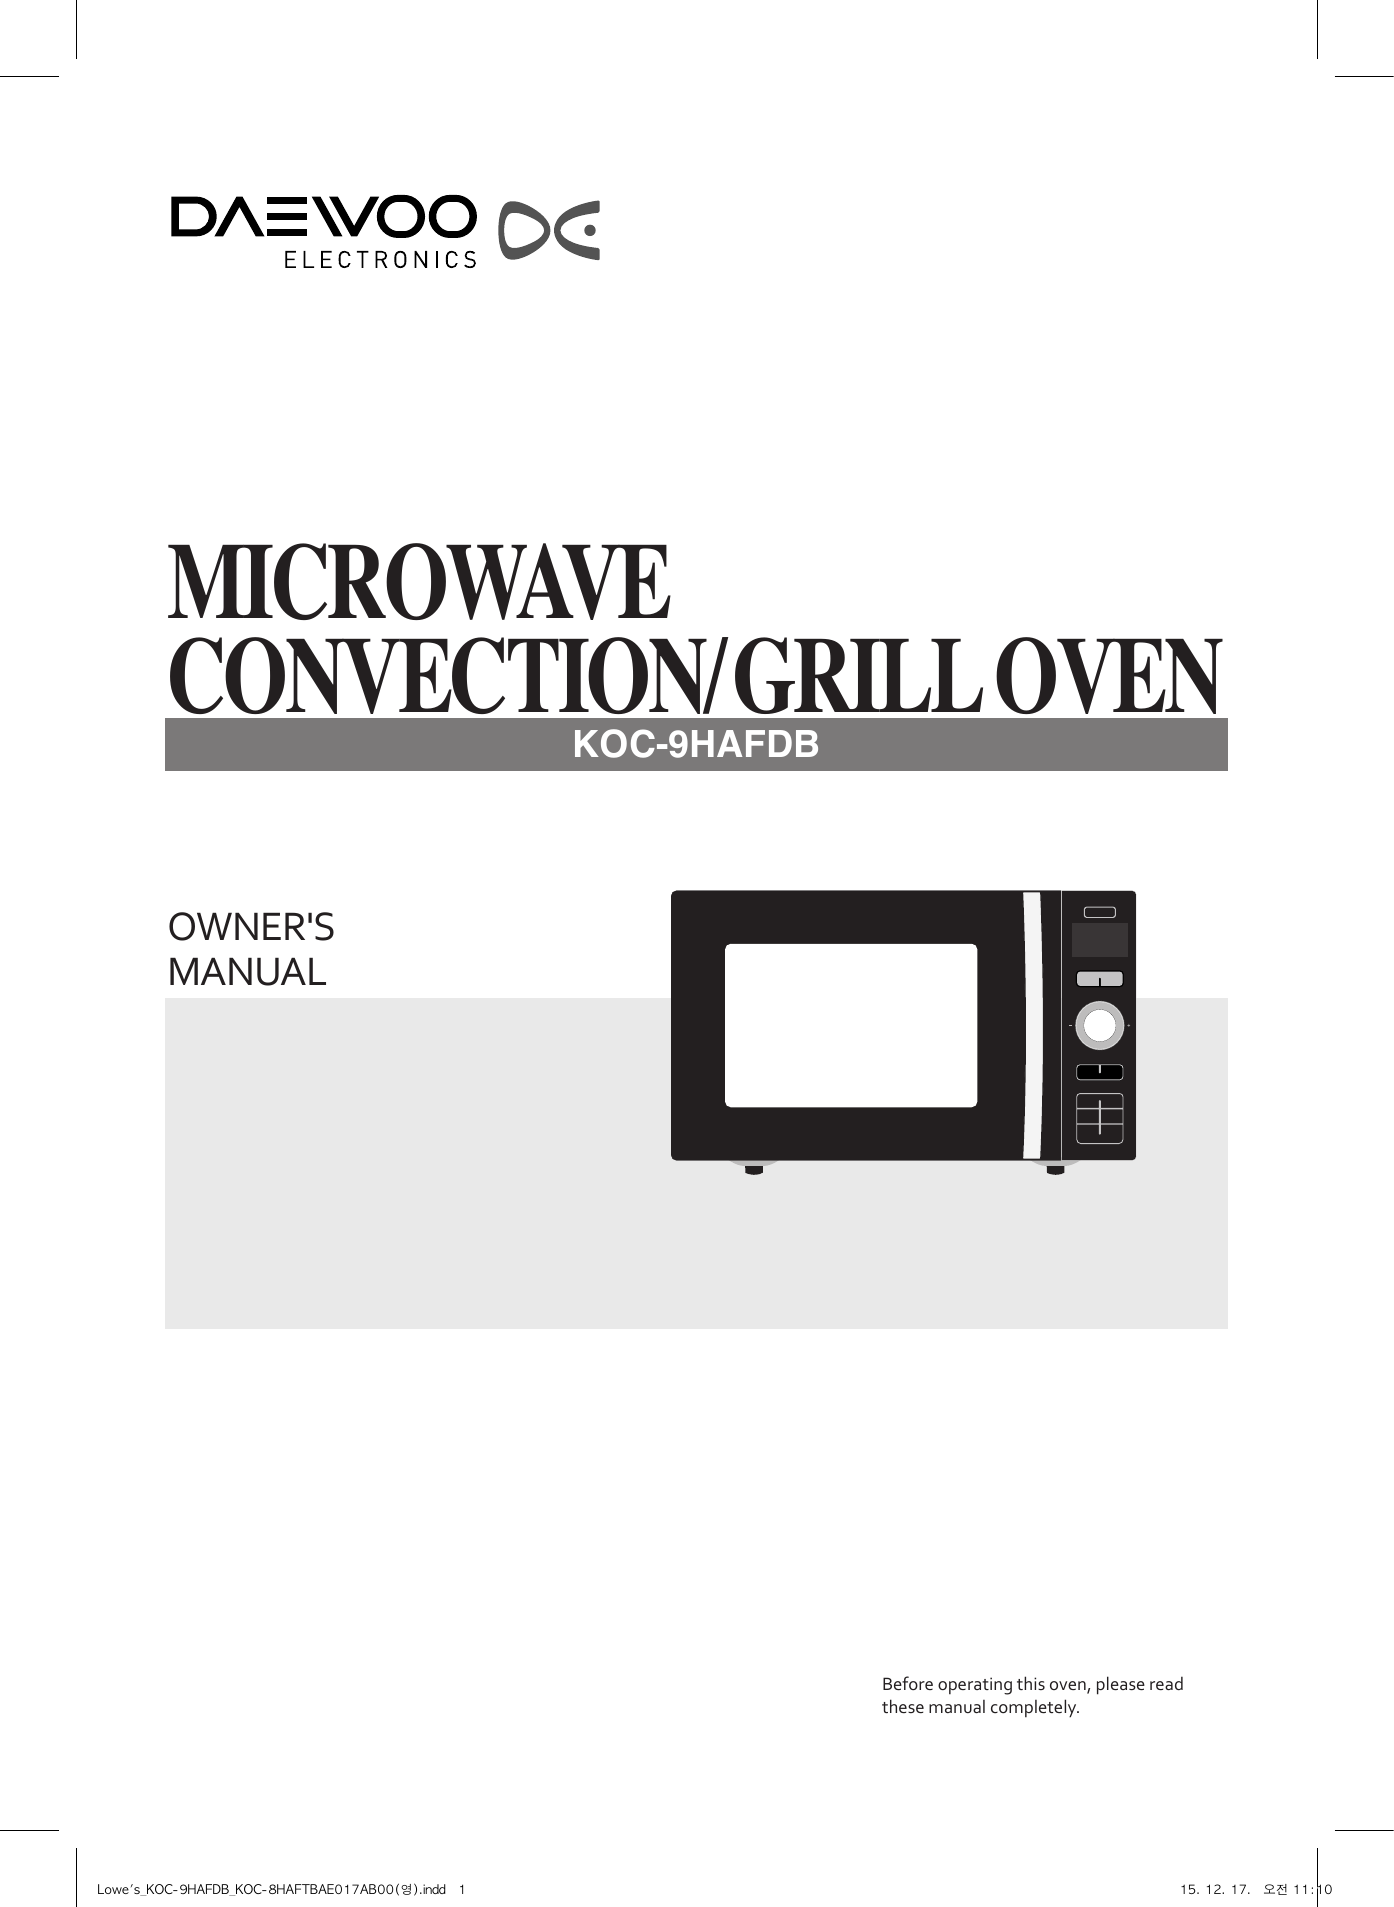 OWNER&apos;SMANUALBefore operating this oven, please readthese manual completely.MICROWAVECONVECTION/ GRILL OVENKOC-9HAFDBLowe&apos;s_KOC-9HAFDB_KOC-8HAFTBAE017AB00(영).indd   1 15. 12. 17.   오전 11:10